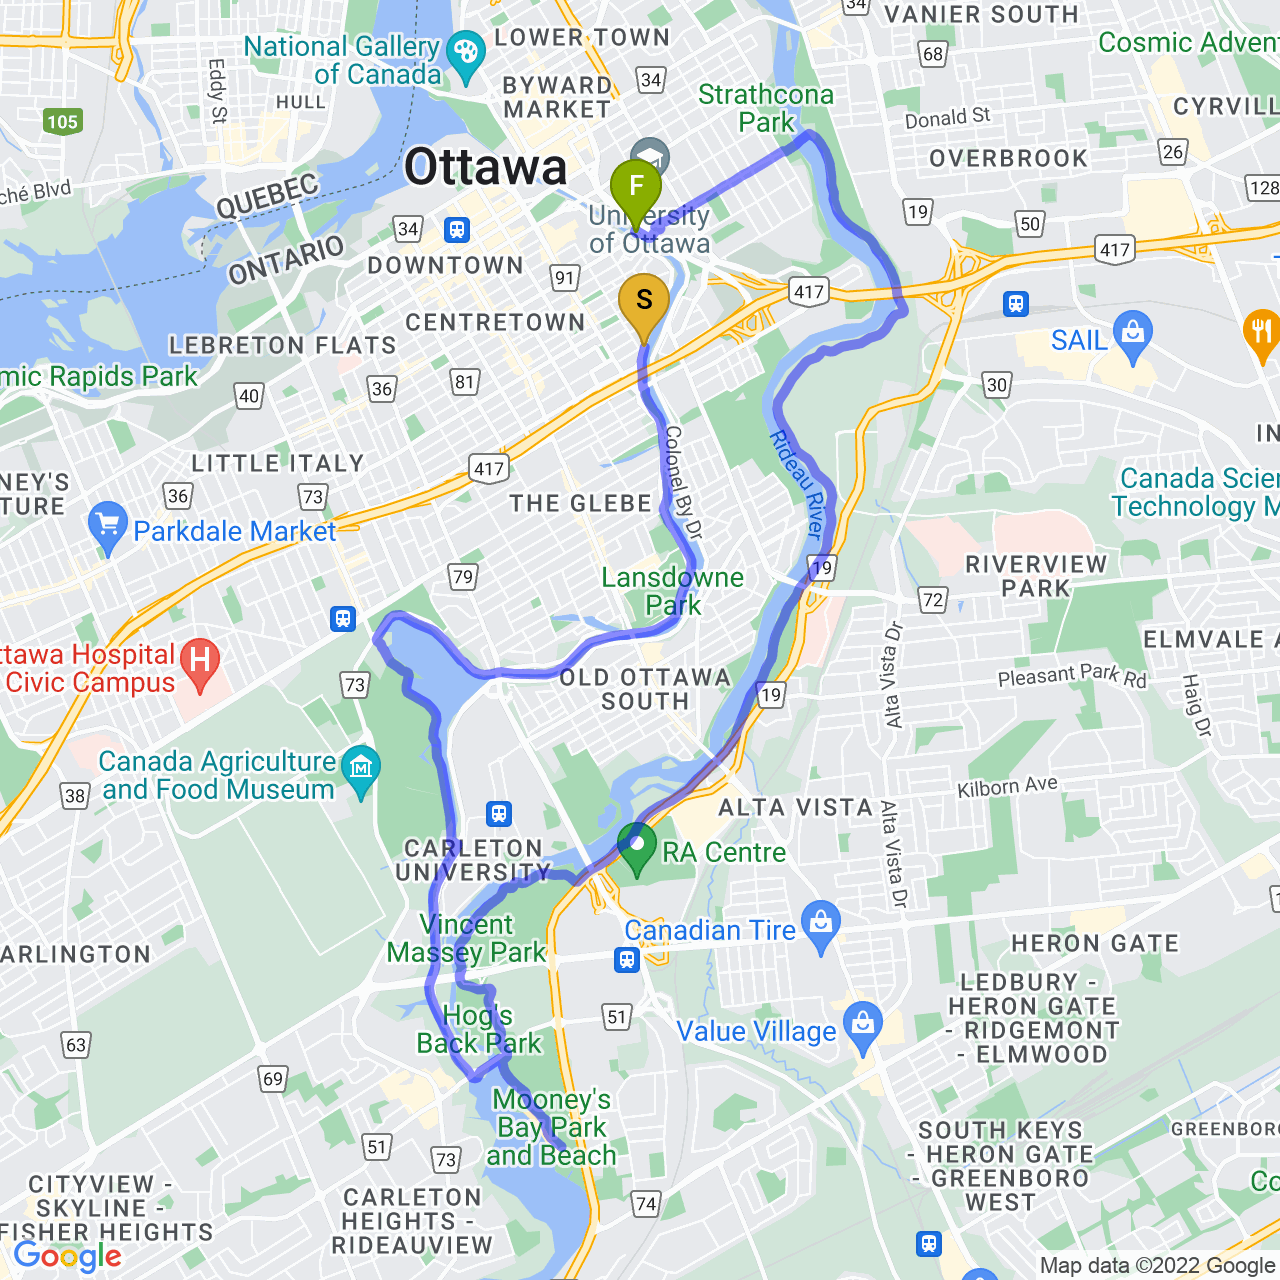 map of chill afternoon ride